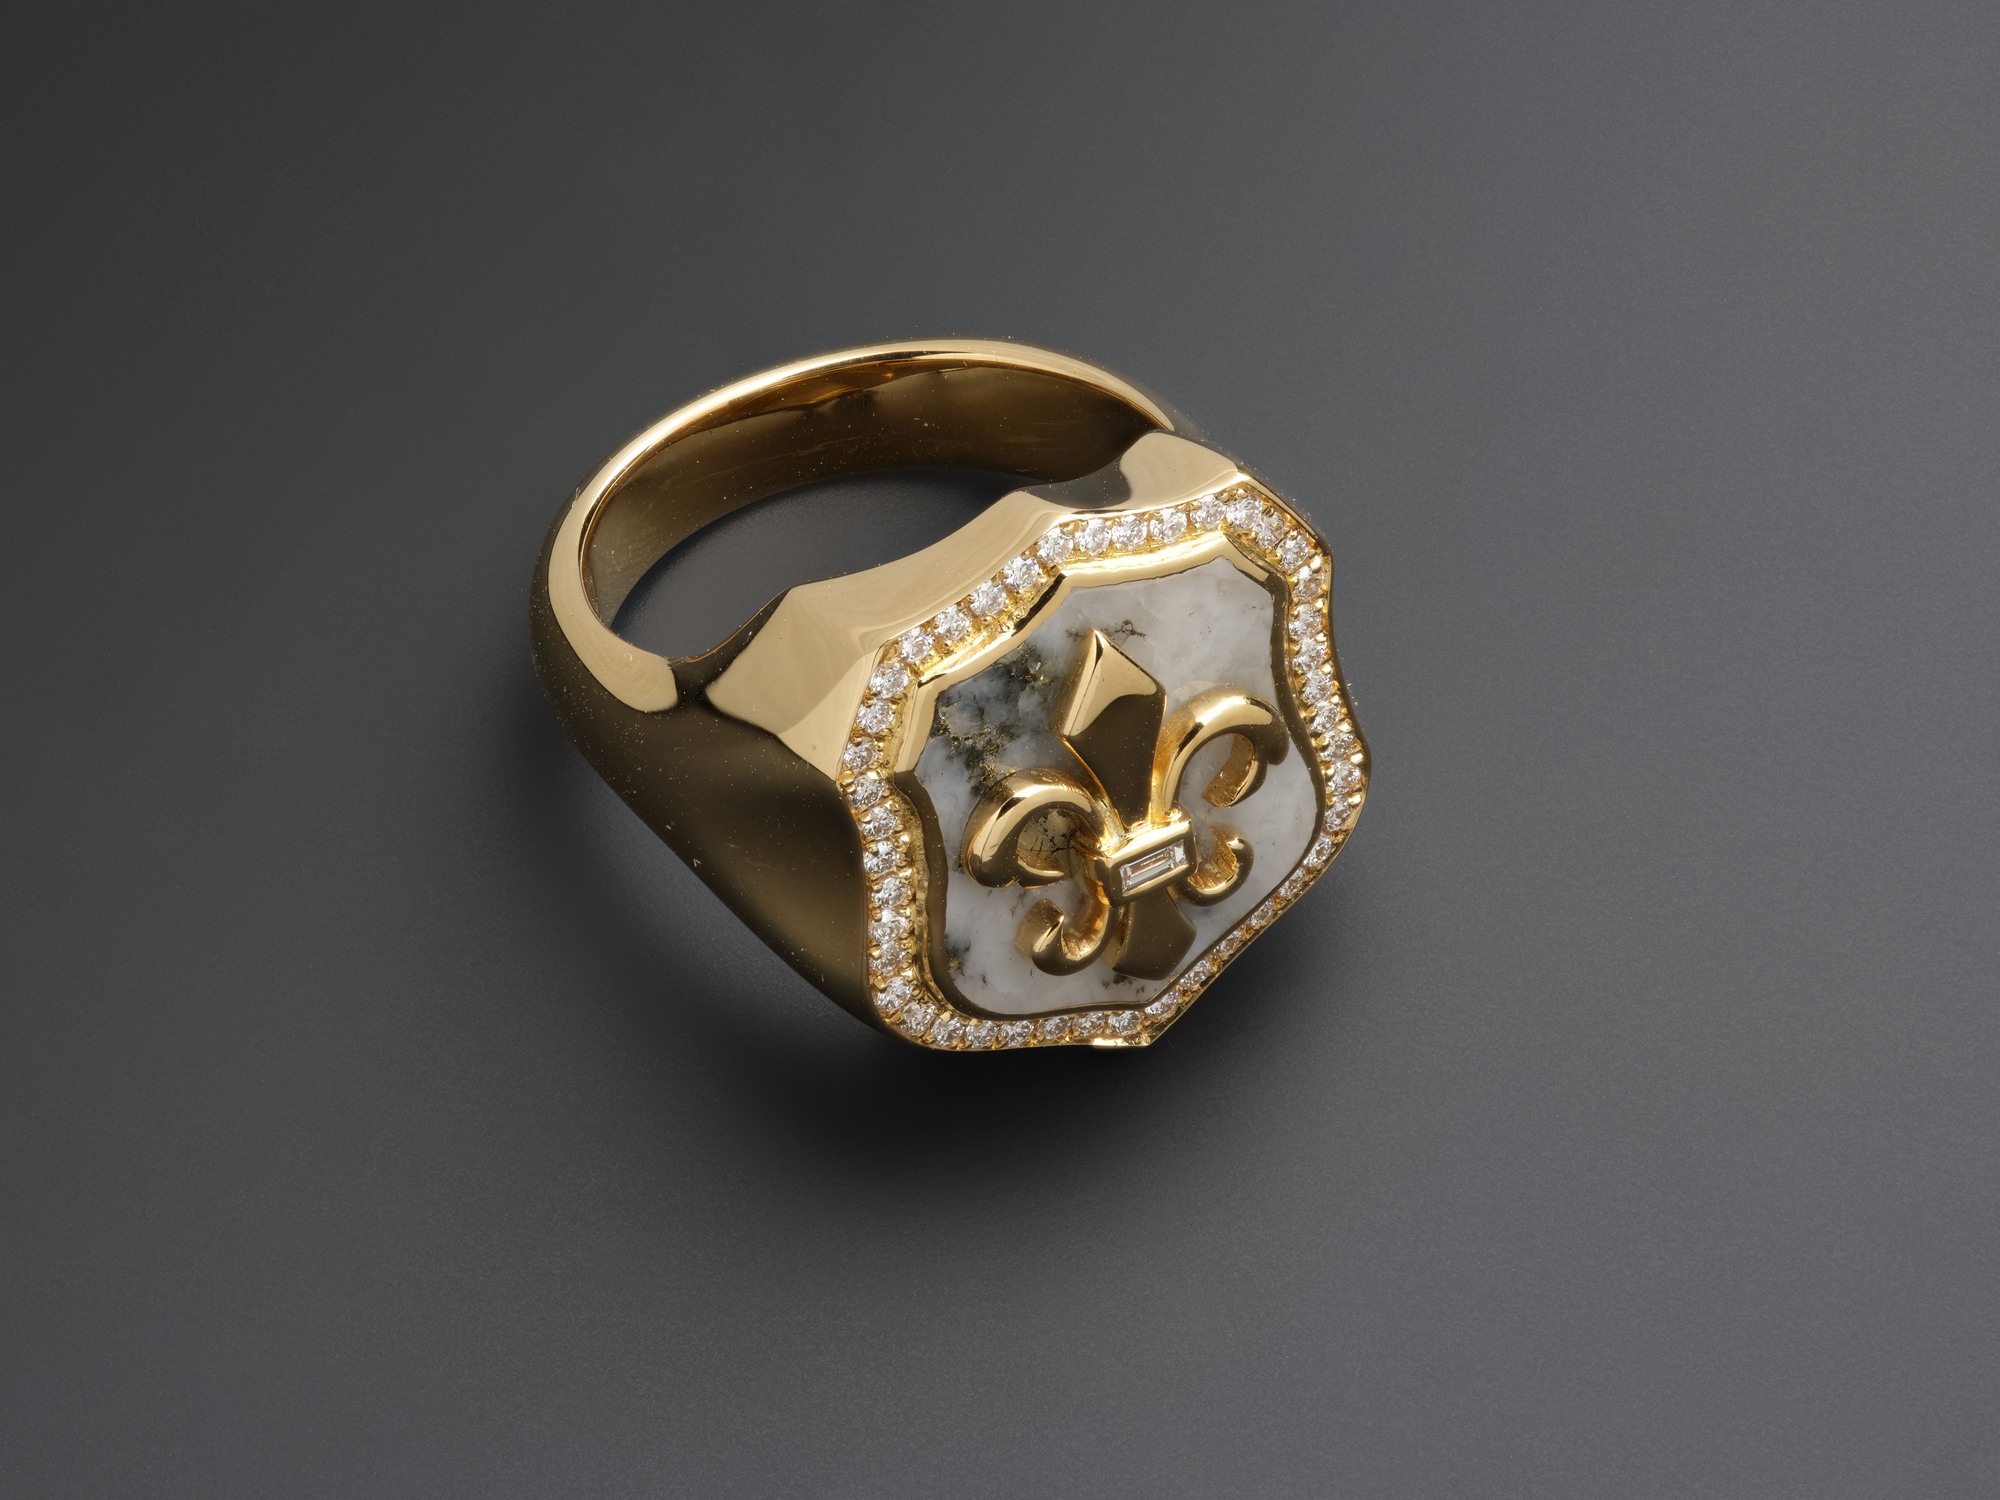 Singet ring of Scottish gold from Scotland’s first commercial gold mine (in Cononish Glen), and made by Hamilton & Inches Ltd of Edinburgh, 2019. X. 2020.22. Not only is the ring made from Scottish gold, it is set with a piece of quartz from the mine. This quartz is the host rock for the gold, deep under the mountain Beinn Chùirn in Loch Lomond and the Trossachs National Park. 